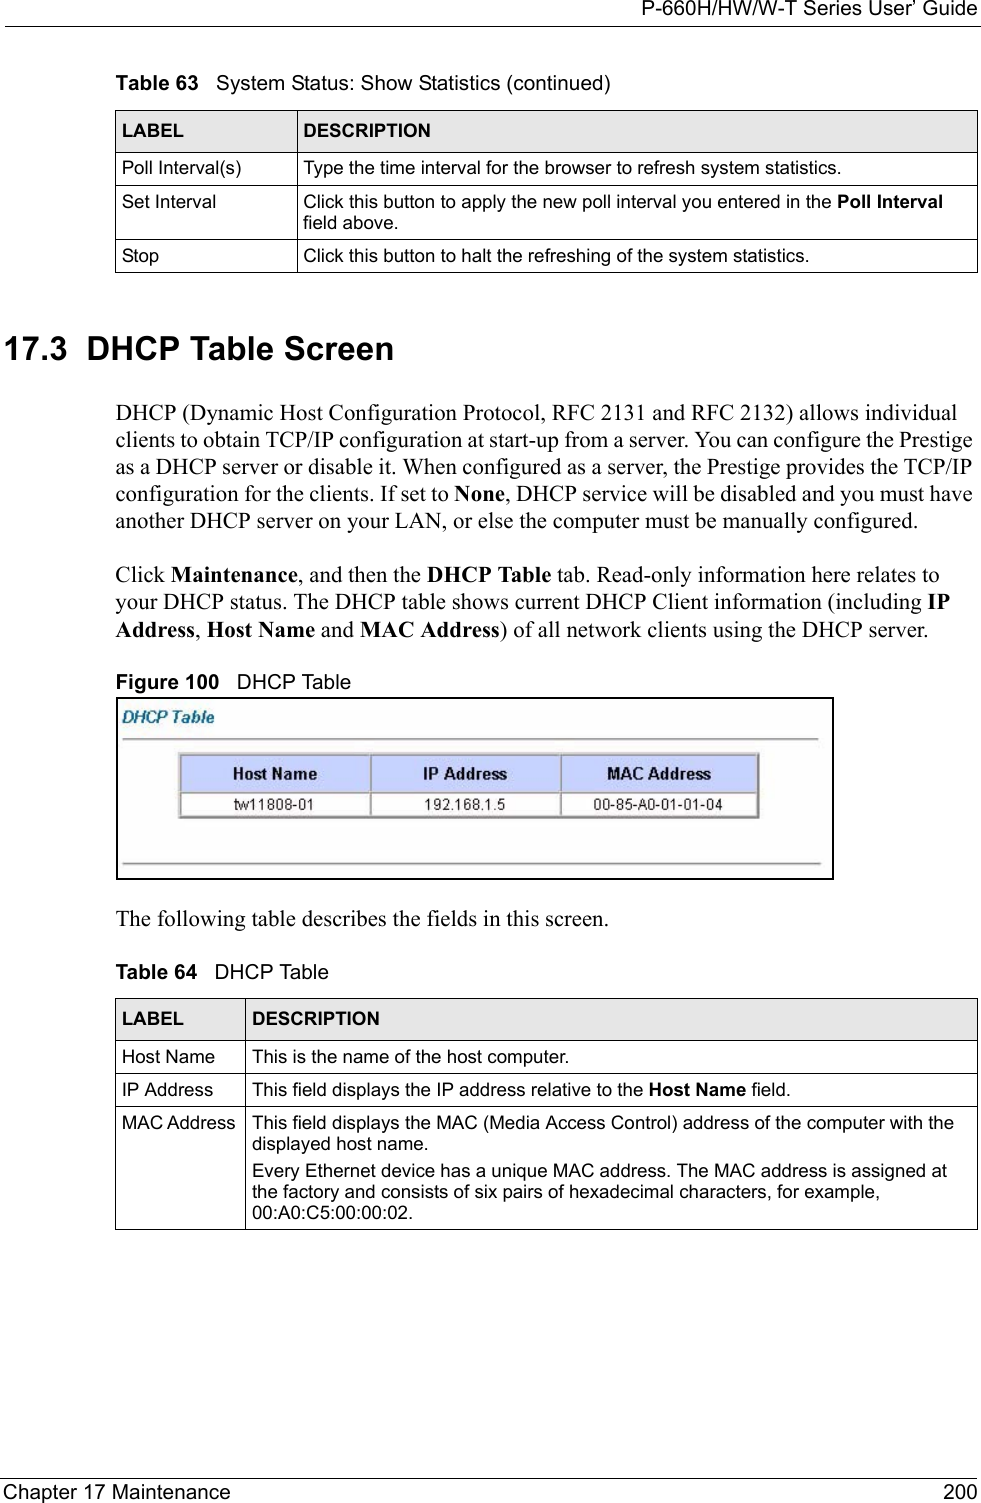 P-660H/HW/W-T Series User’ GuideChapter 17 Maintenance 20017.3  DHCP Table Screen DHCP (Dynamic Host Configuration Protocol, RFC 2131 and RFC 2132) allows individual clients to obtain TCP/IP configuration at start-up from a server. You can configure the Prestige as a DHCP server or disable it. When configured as a server, the Prestige provides the TCP/IP configuration for the clients. If set to None, DHCP service will be disabled and you must have another DHCP server on your LAN, or else the computer must be manually configured.Click Maintenance, and then the DHCP Table tab. Read-only information here relates to your DHCP status. The DHCP table shows current DHCP Client information (including IP Address, Host Name and MAC Address) of all network clients using the DHCP server.Figure 100   DHCP TableThe following table describes the fields in this screen.  Poll Interval(s) Type the time interval for the browser to refresh system statistics.Set Interval Click this button to apply the new poll interval you entered in the Poll Interval field above.Stop Click this button to halt the refreshing of the system statistics.Table 63   System Status: Show Statistics (continued)LABEL DESCRIPTIONTable 64   DHCP TableLABEL DESCRIPTIONHost Name This is the name of the host computer.IP Address This field displays the IP address relative to the Host Name field. MAC Address  This field displays the MAC (Media Access Control) address of the computer with the displayed host name.Every Ethernet device has a unique MAC address. The MAC address is assigned at the factory and consists of six pairs of hexadecimal characters, for example, 00:A0:C5:00:00:02.